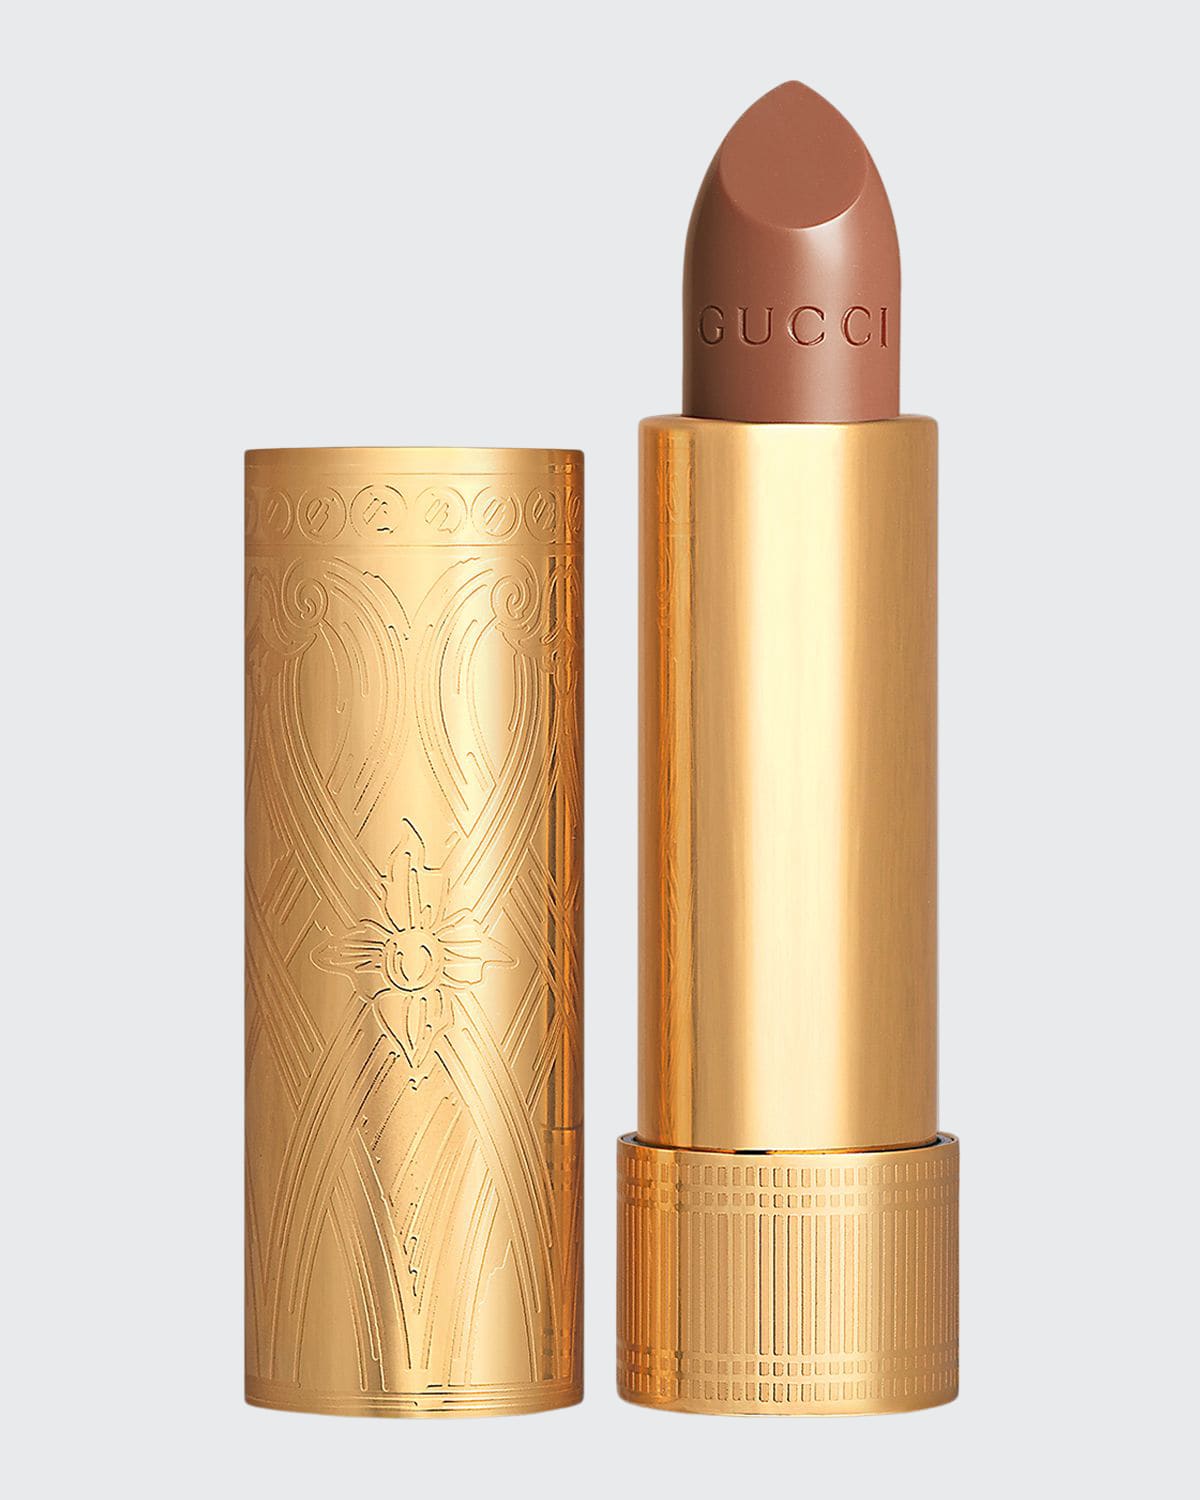 Gucci Rouge &#224 L&#232vres Satin Lipstick In 104 Penny Beige